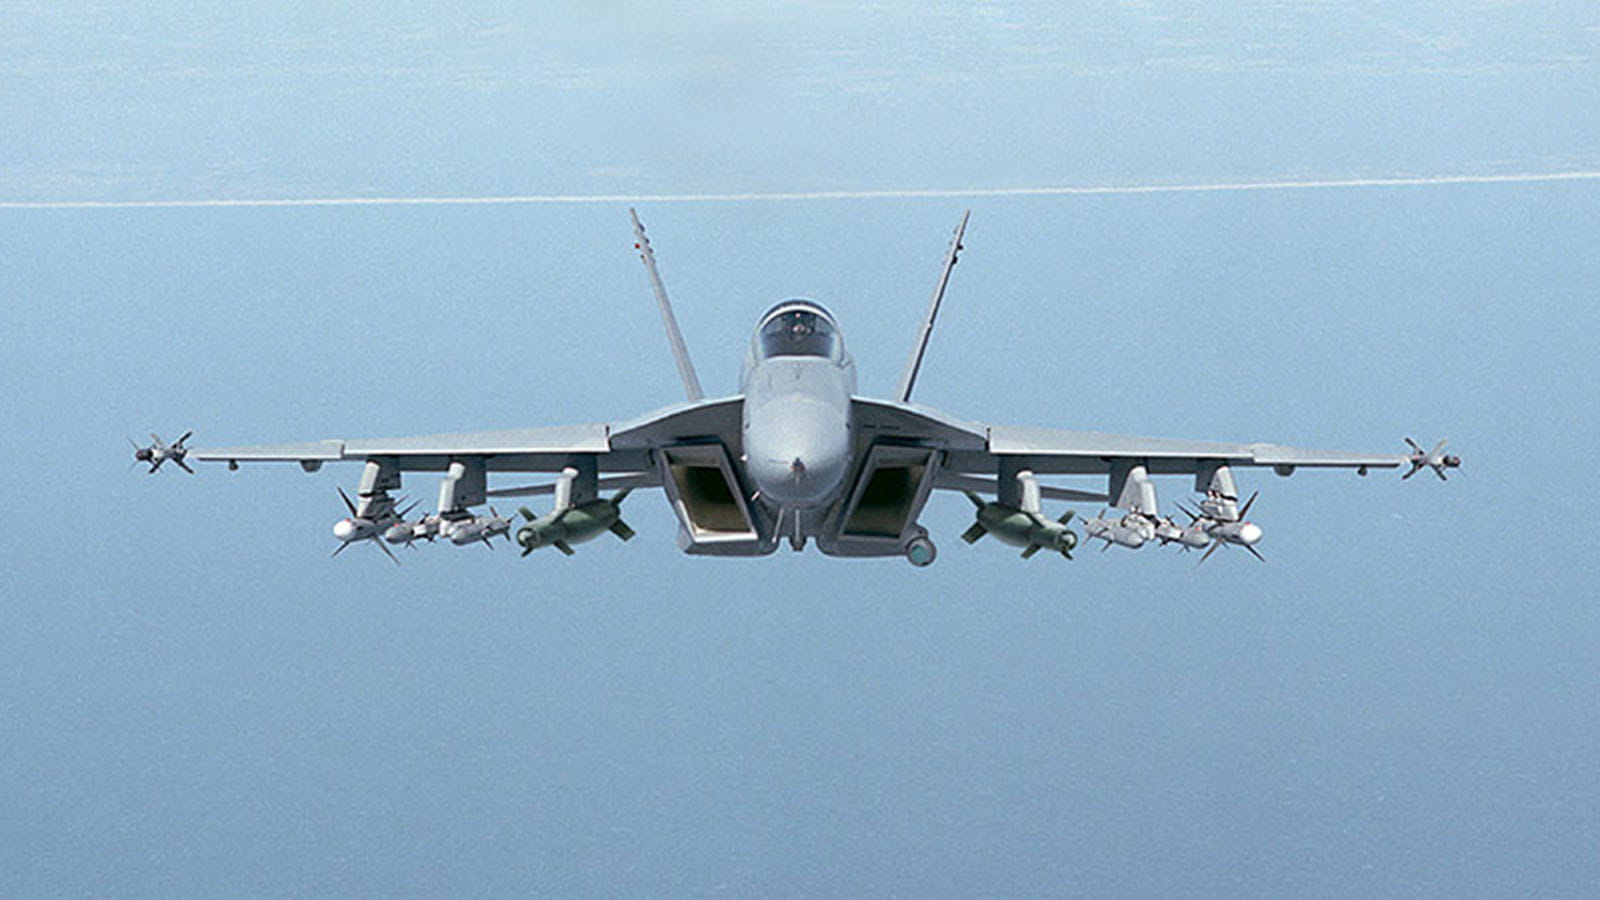 The F/A-18 Super Hornet ushers in a new era for the multirole strike fighter.